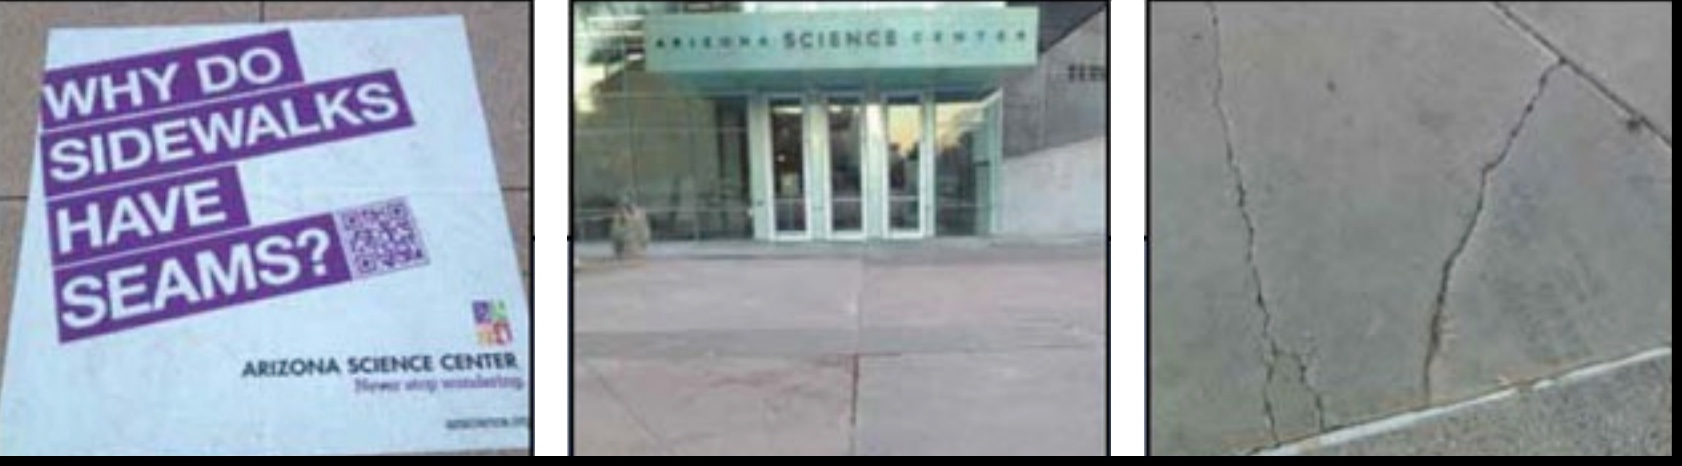 If you teach a class called "Why do sidewalks have seams?" at the Arizona Science Center, DO demonstrate why pavers would have been a better choice due to more seams!